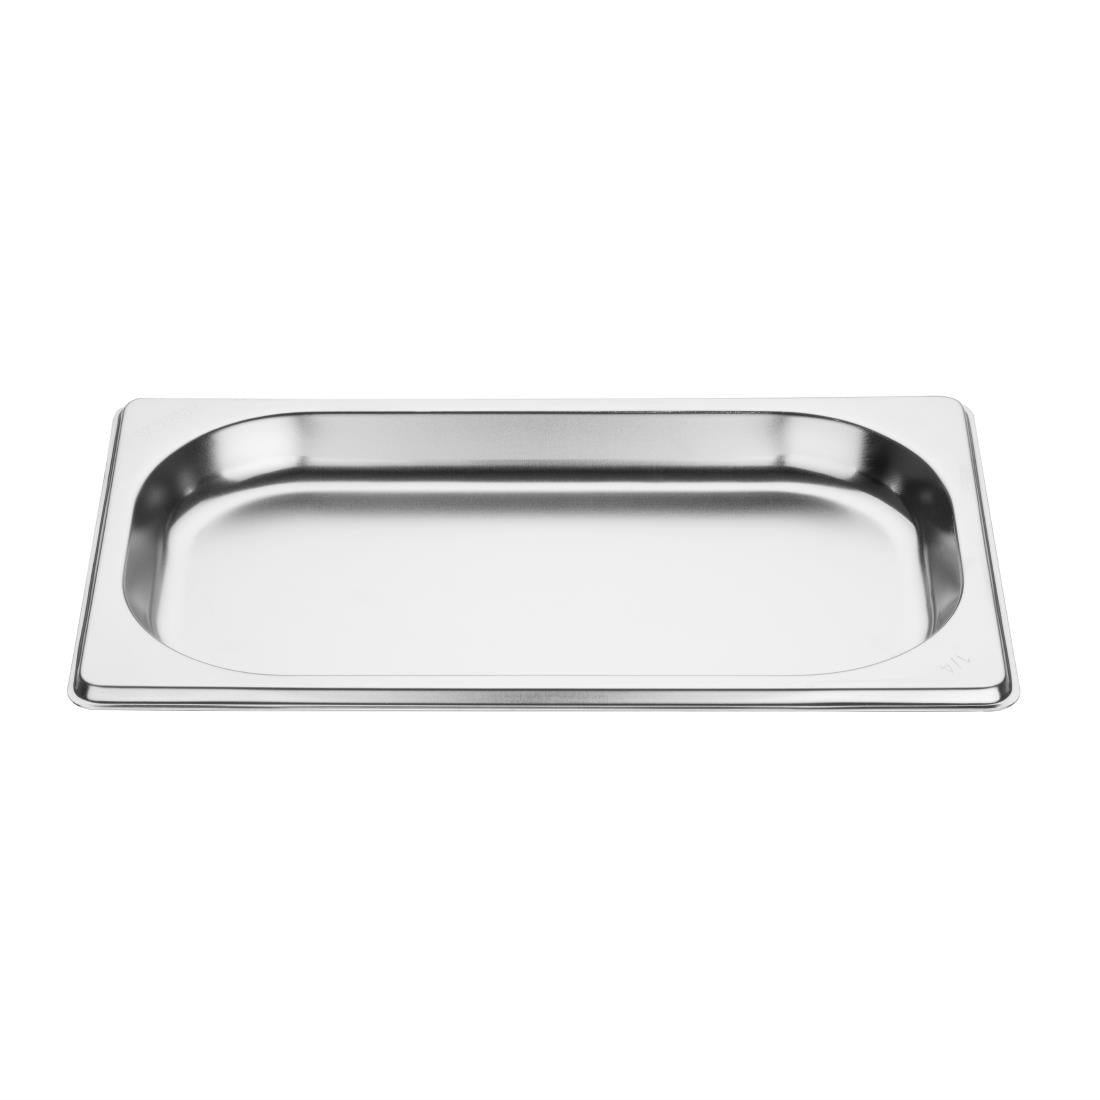 Vogue Stainless Steel 1/4 Gastronorm Pan 20mm